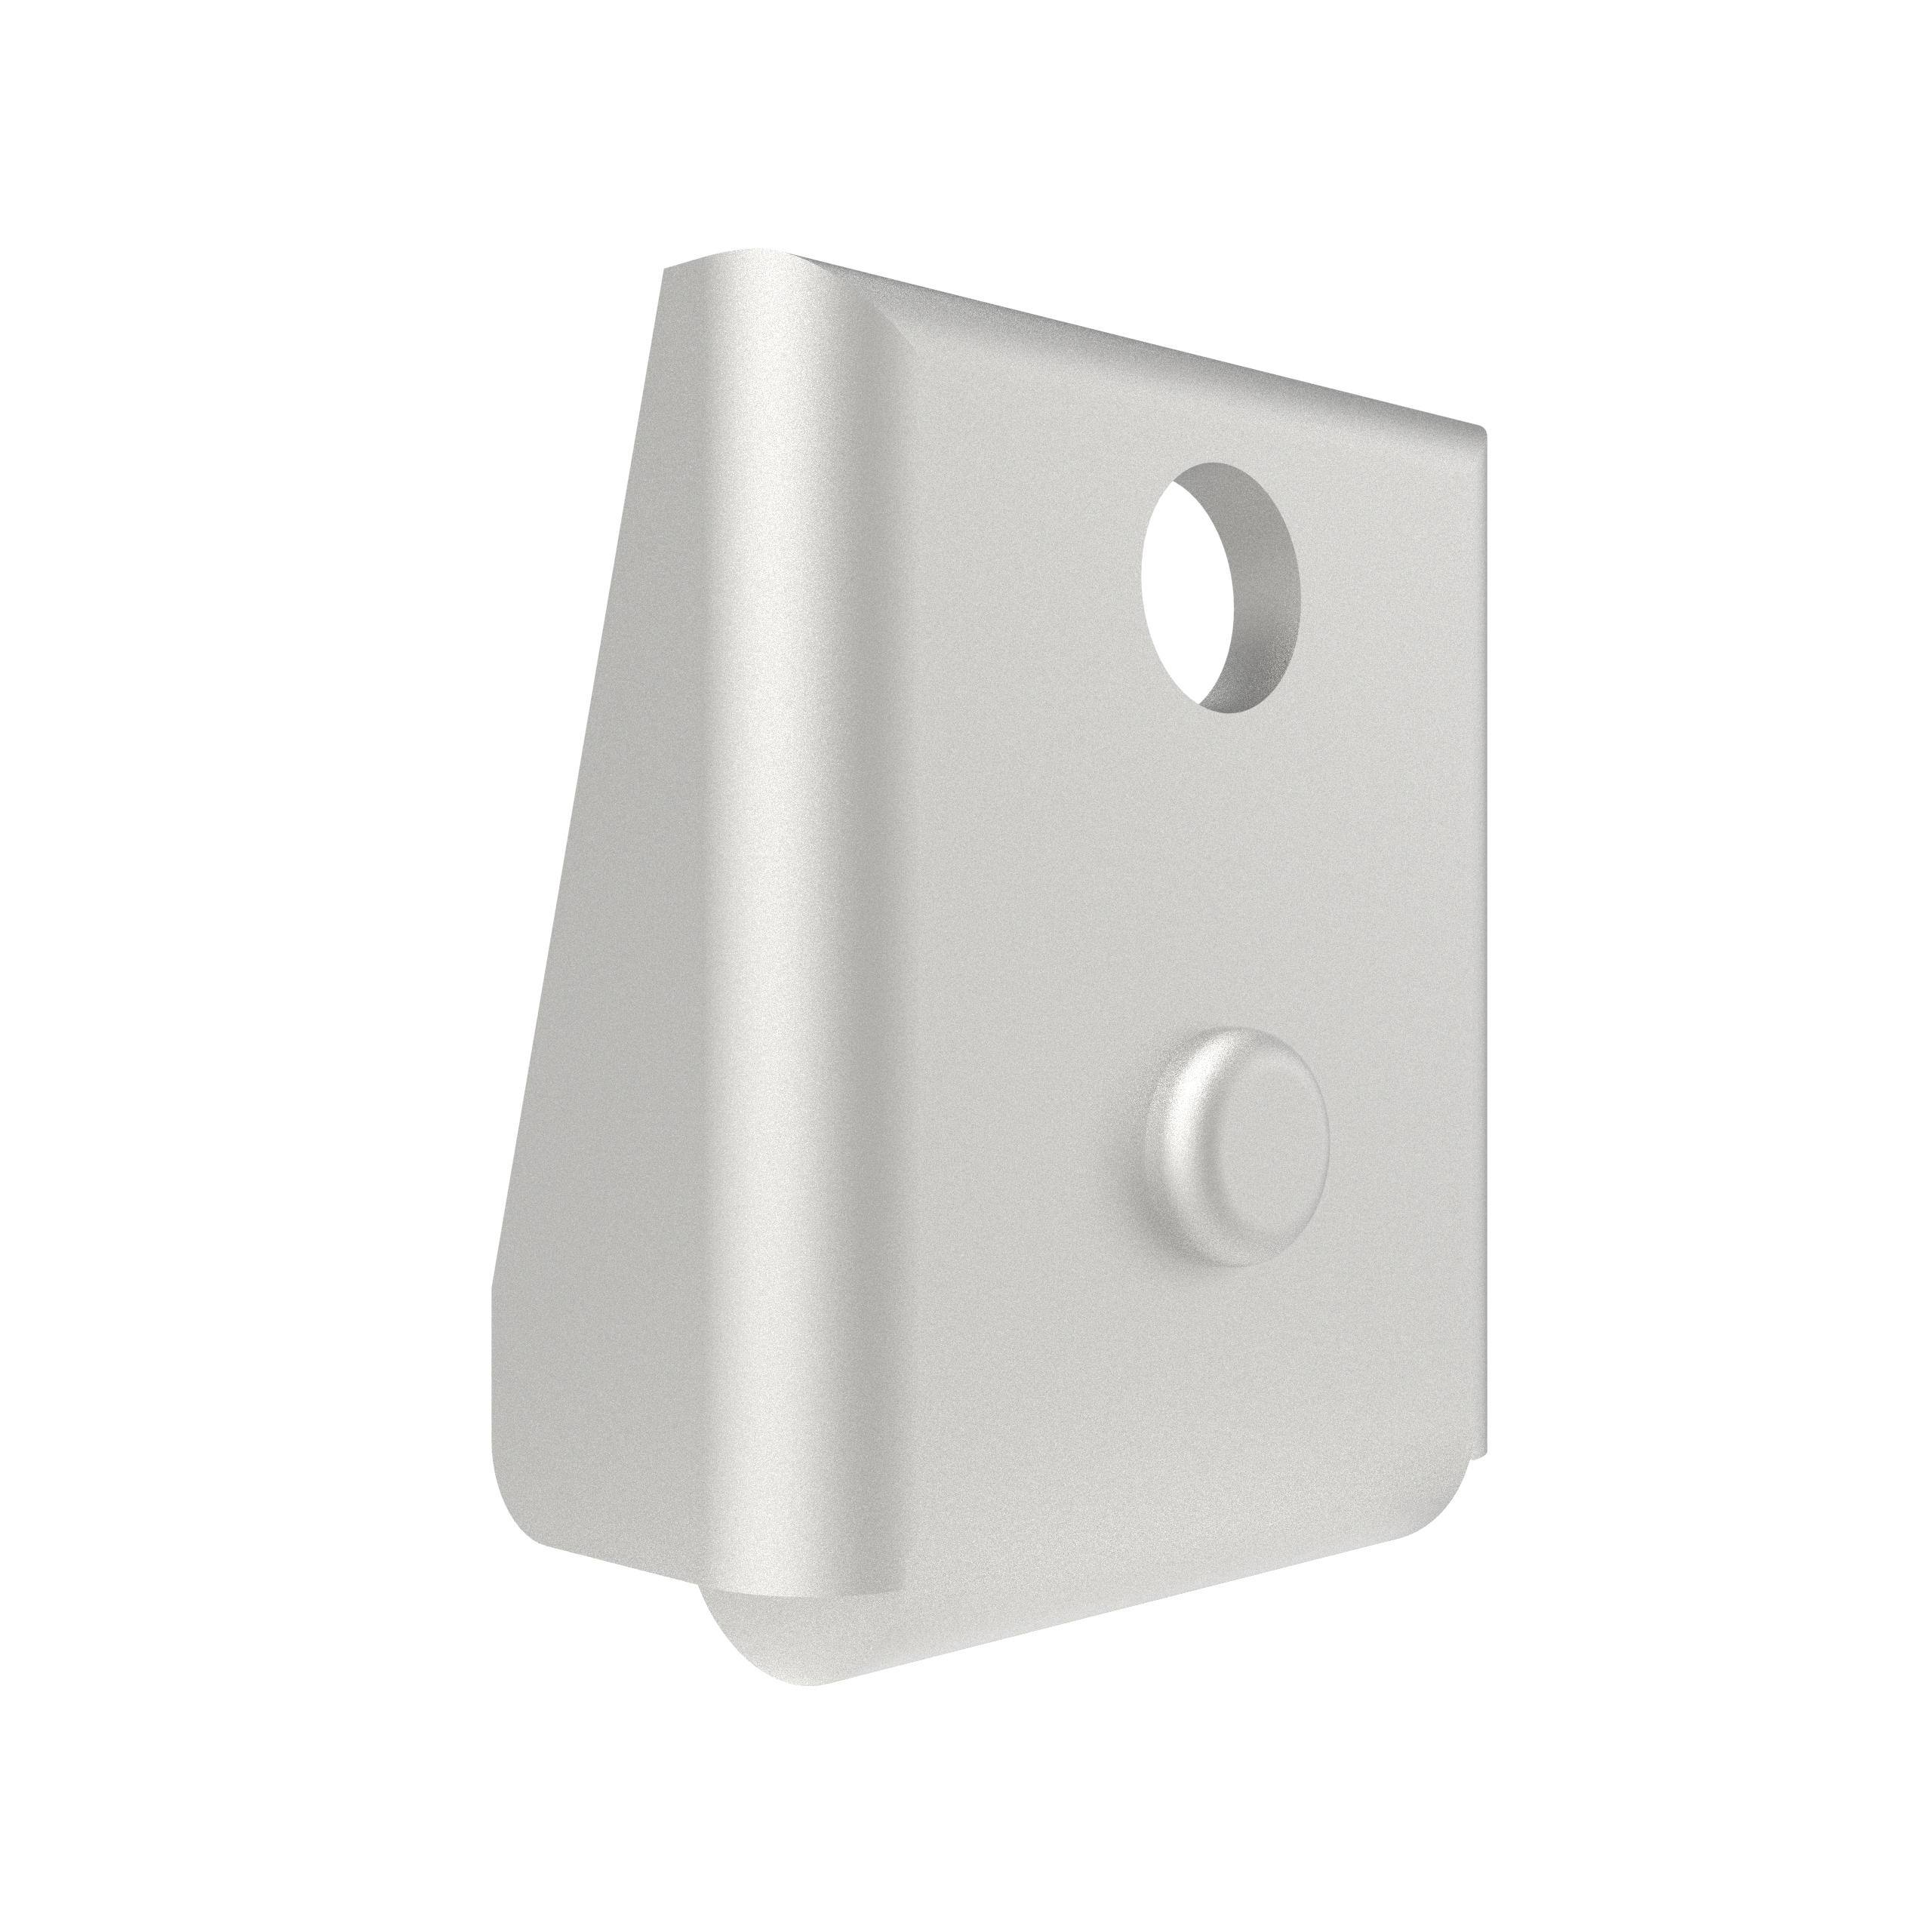  1641-102 | Exposed keeper, single hole mounting, stainless steel, passivated, bright